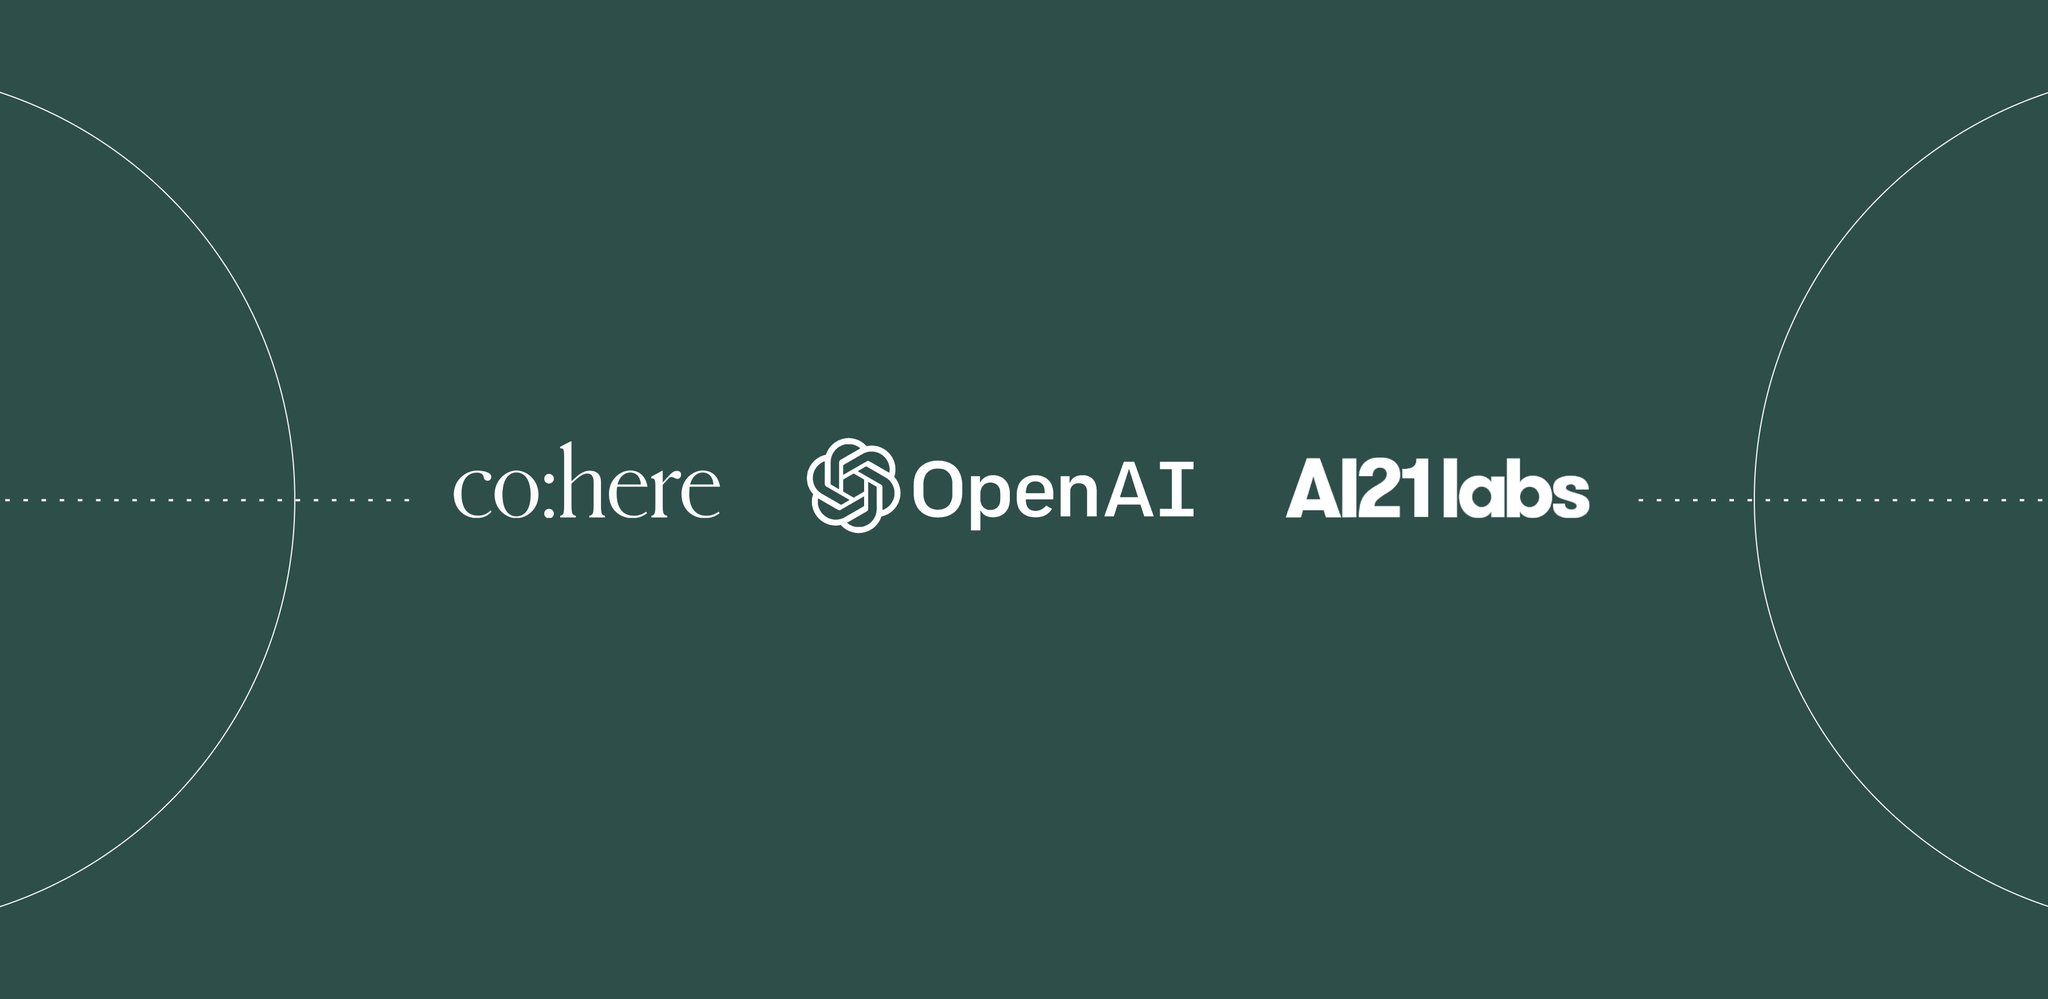 http://Cohere%20releases%20LLM%20best%20practices%20with%20OpenAI%20and%20AI21%20Labs